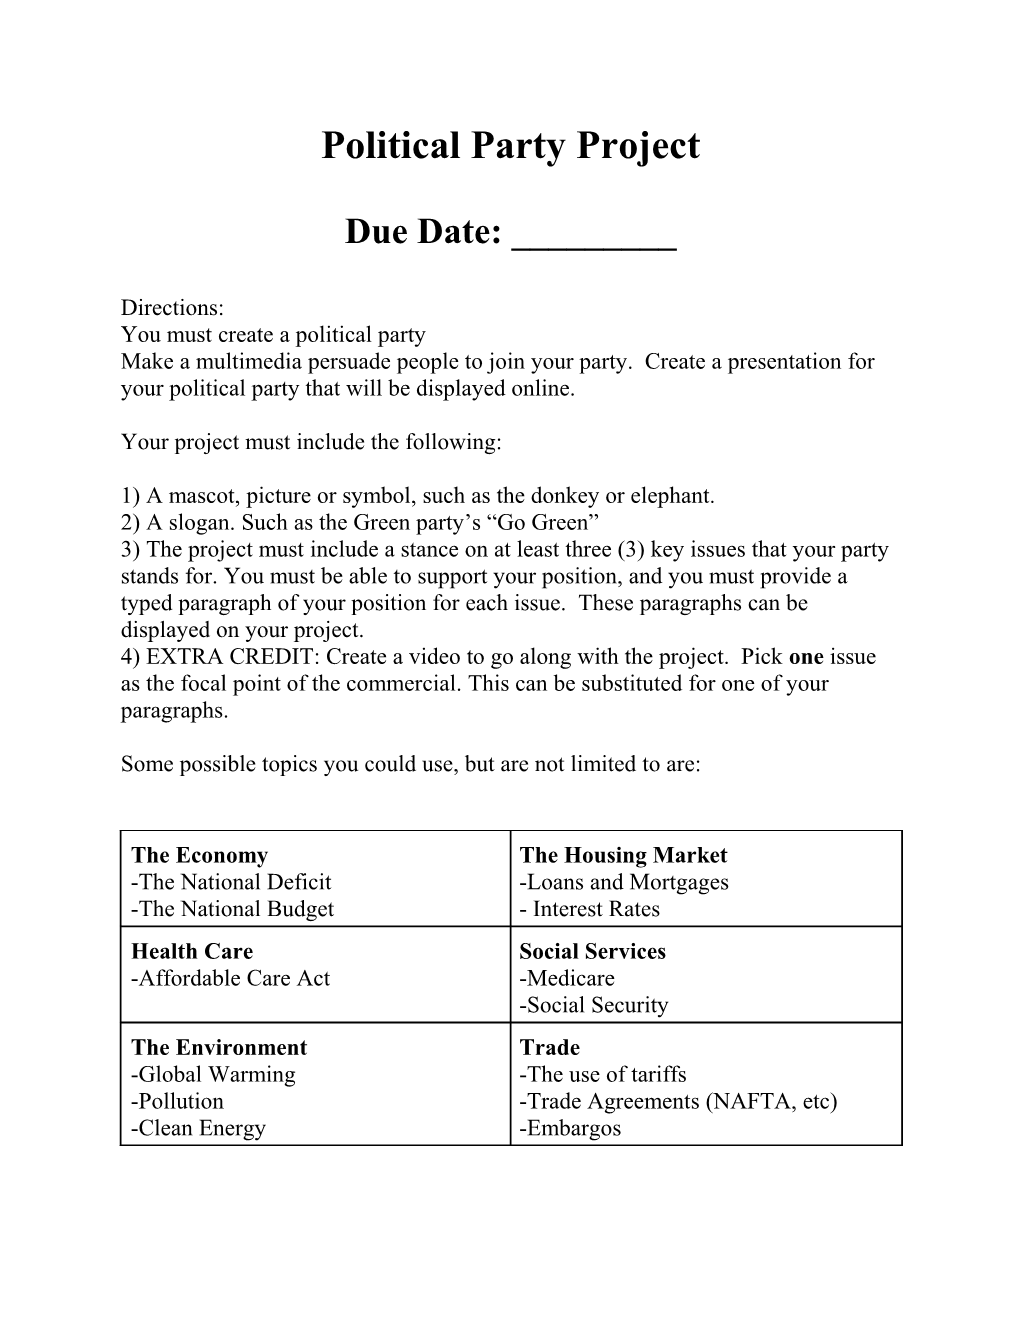 Create Your Own Political Party Project